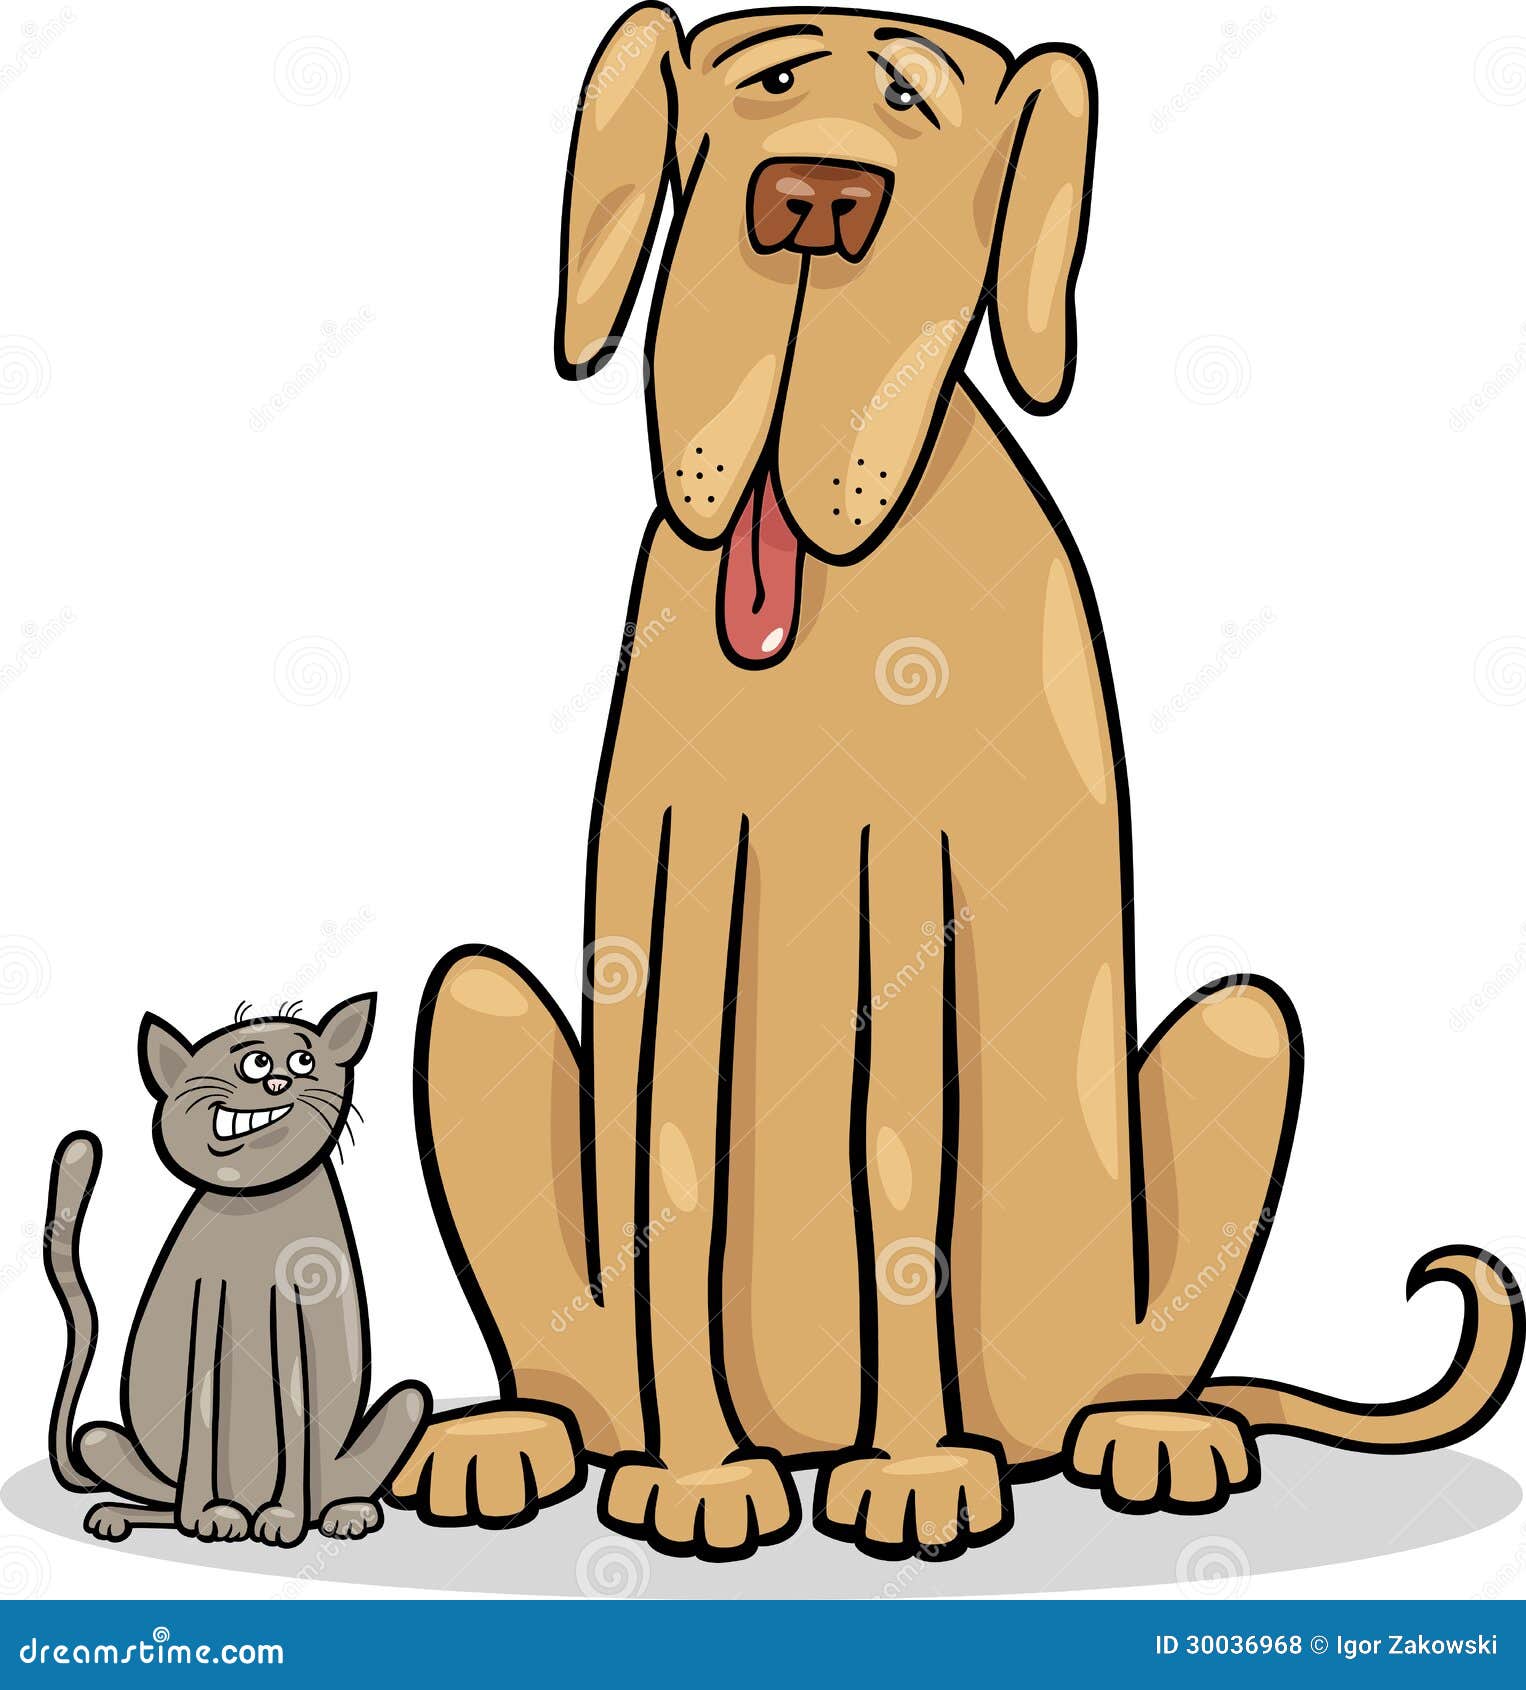 Cartoon Illustration of Cute Small Cat and Funny Big Dog or Great Dane 